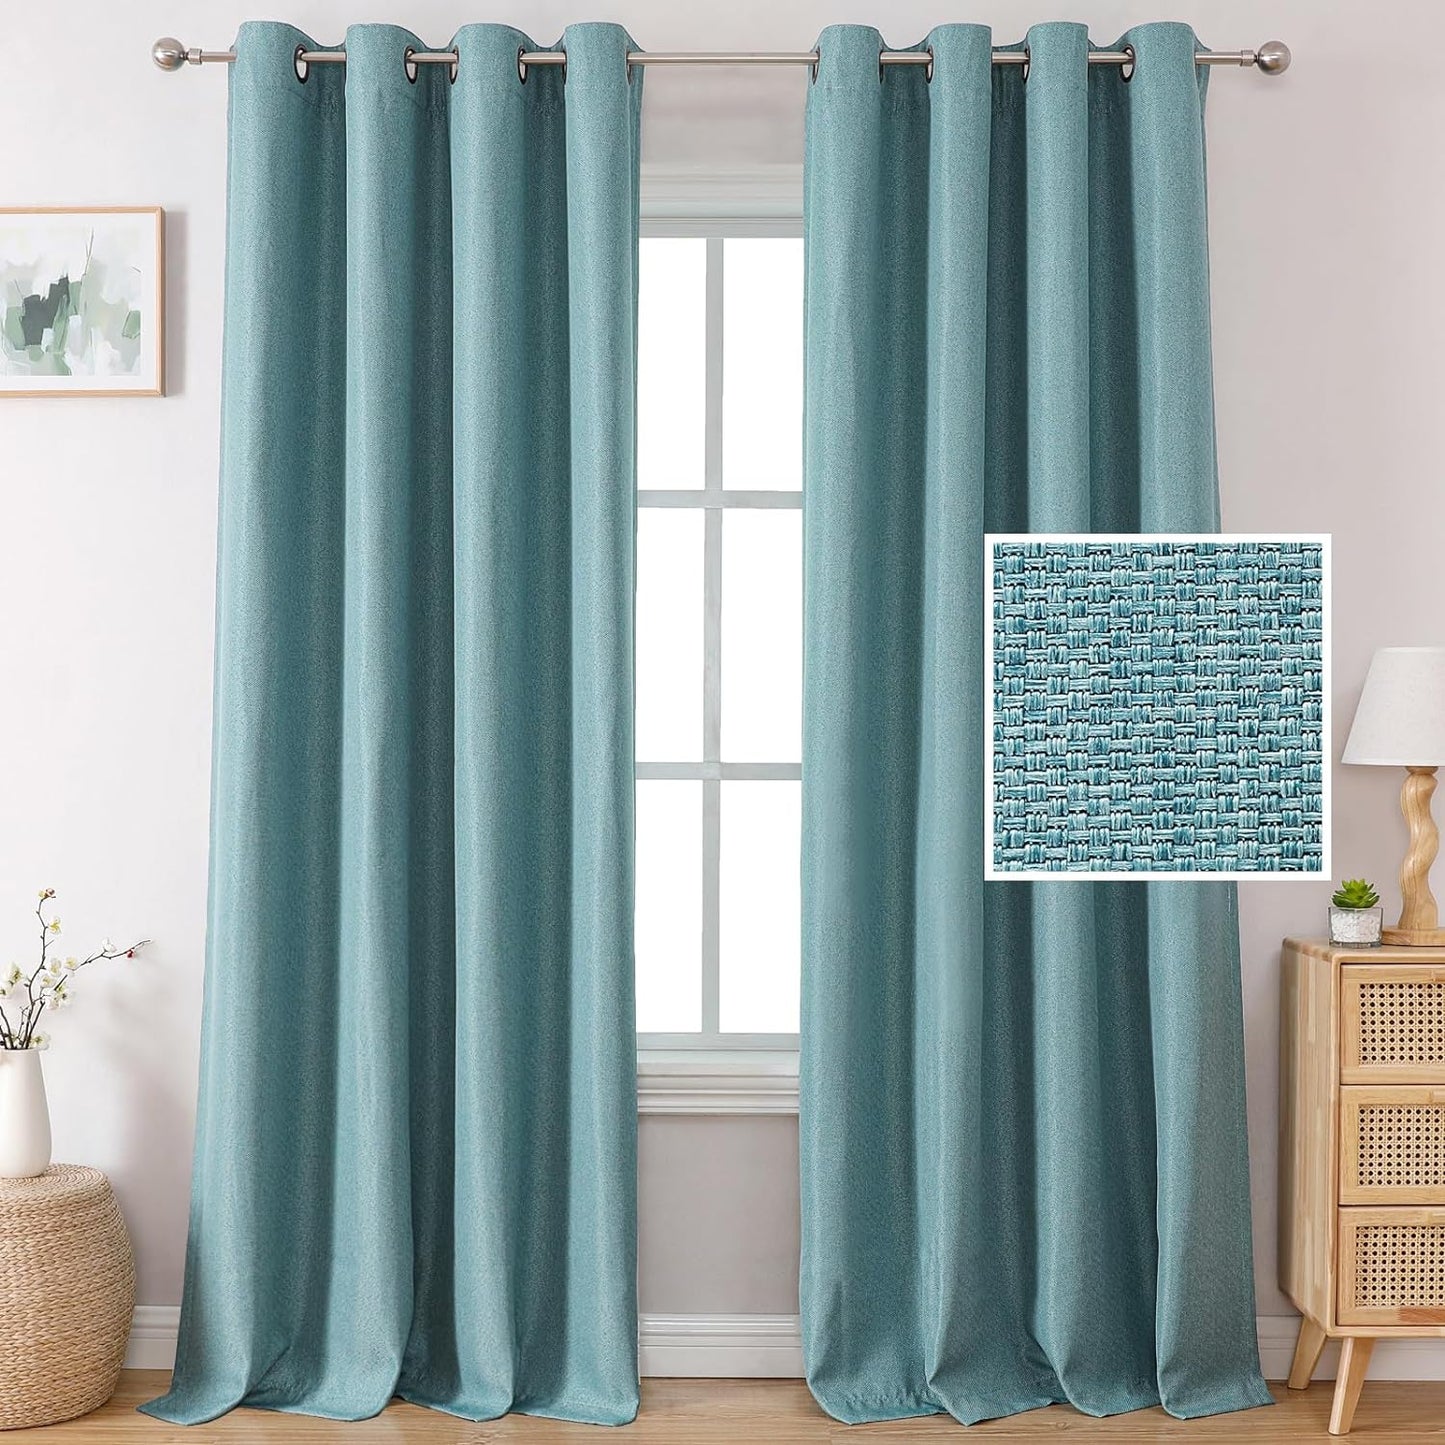 H.VERSAILTEX Linen Blackout Curtains 84 Inches Long Thermal Insulated Room Darkening Linen Curtains for Bedroom Textured Burlap Grommet Window Curtains for Living Room, Bluestone and Taupe, 2 Panels  H.VERSAILTEX Eggshell Blue 52"W X 96"L 